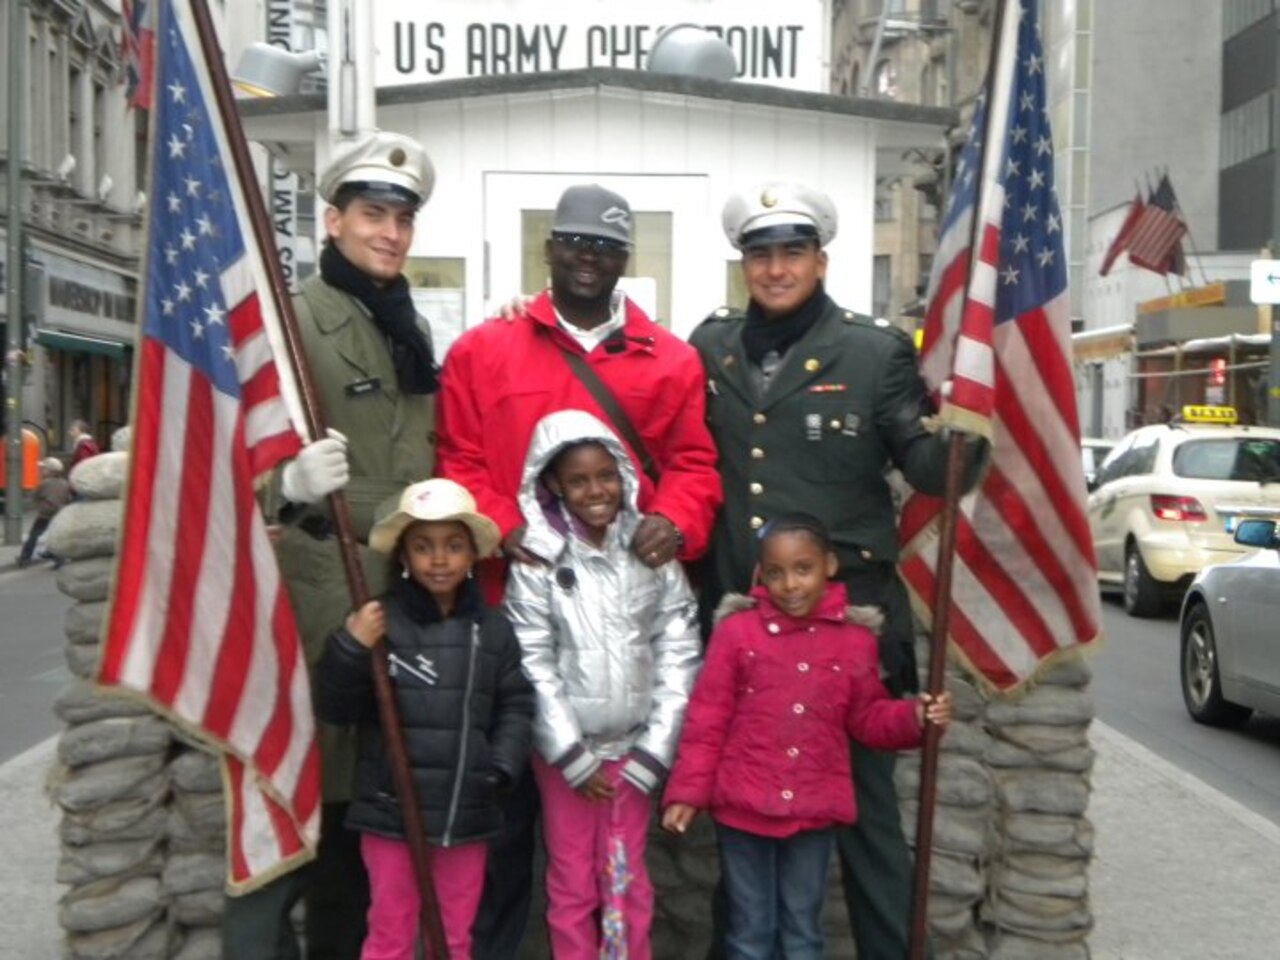 Family poses for photo with German Soldier re-enactors at Checkpoint Charlie.